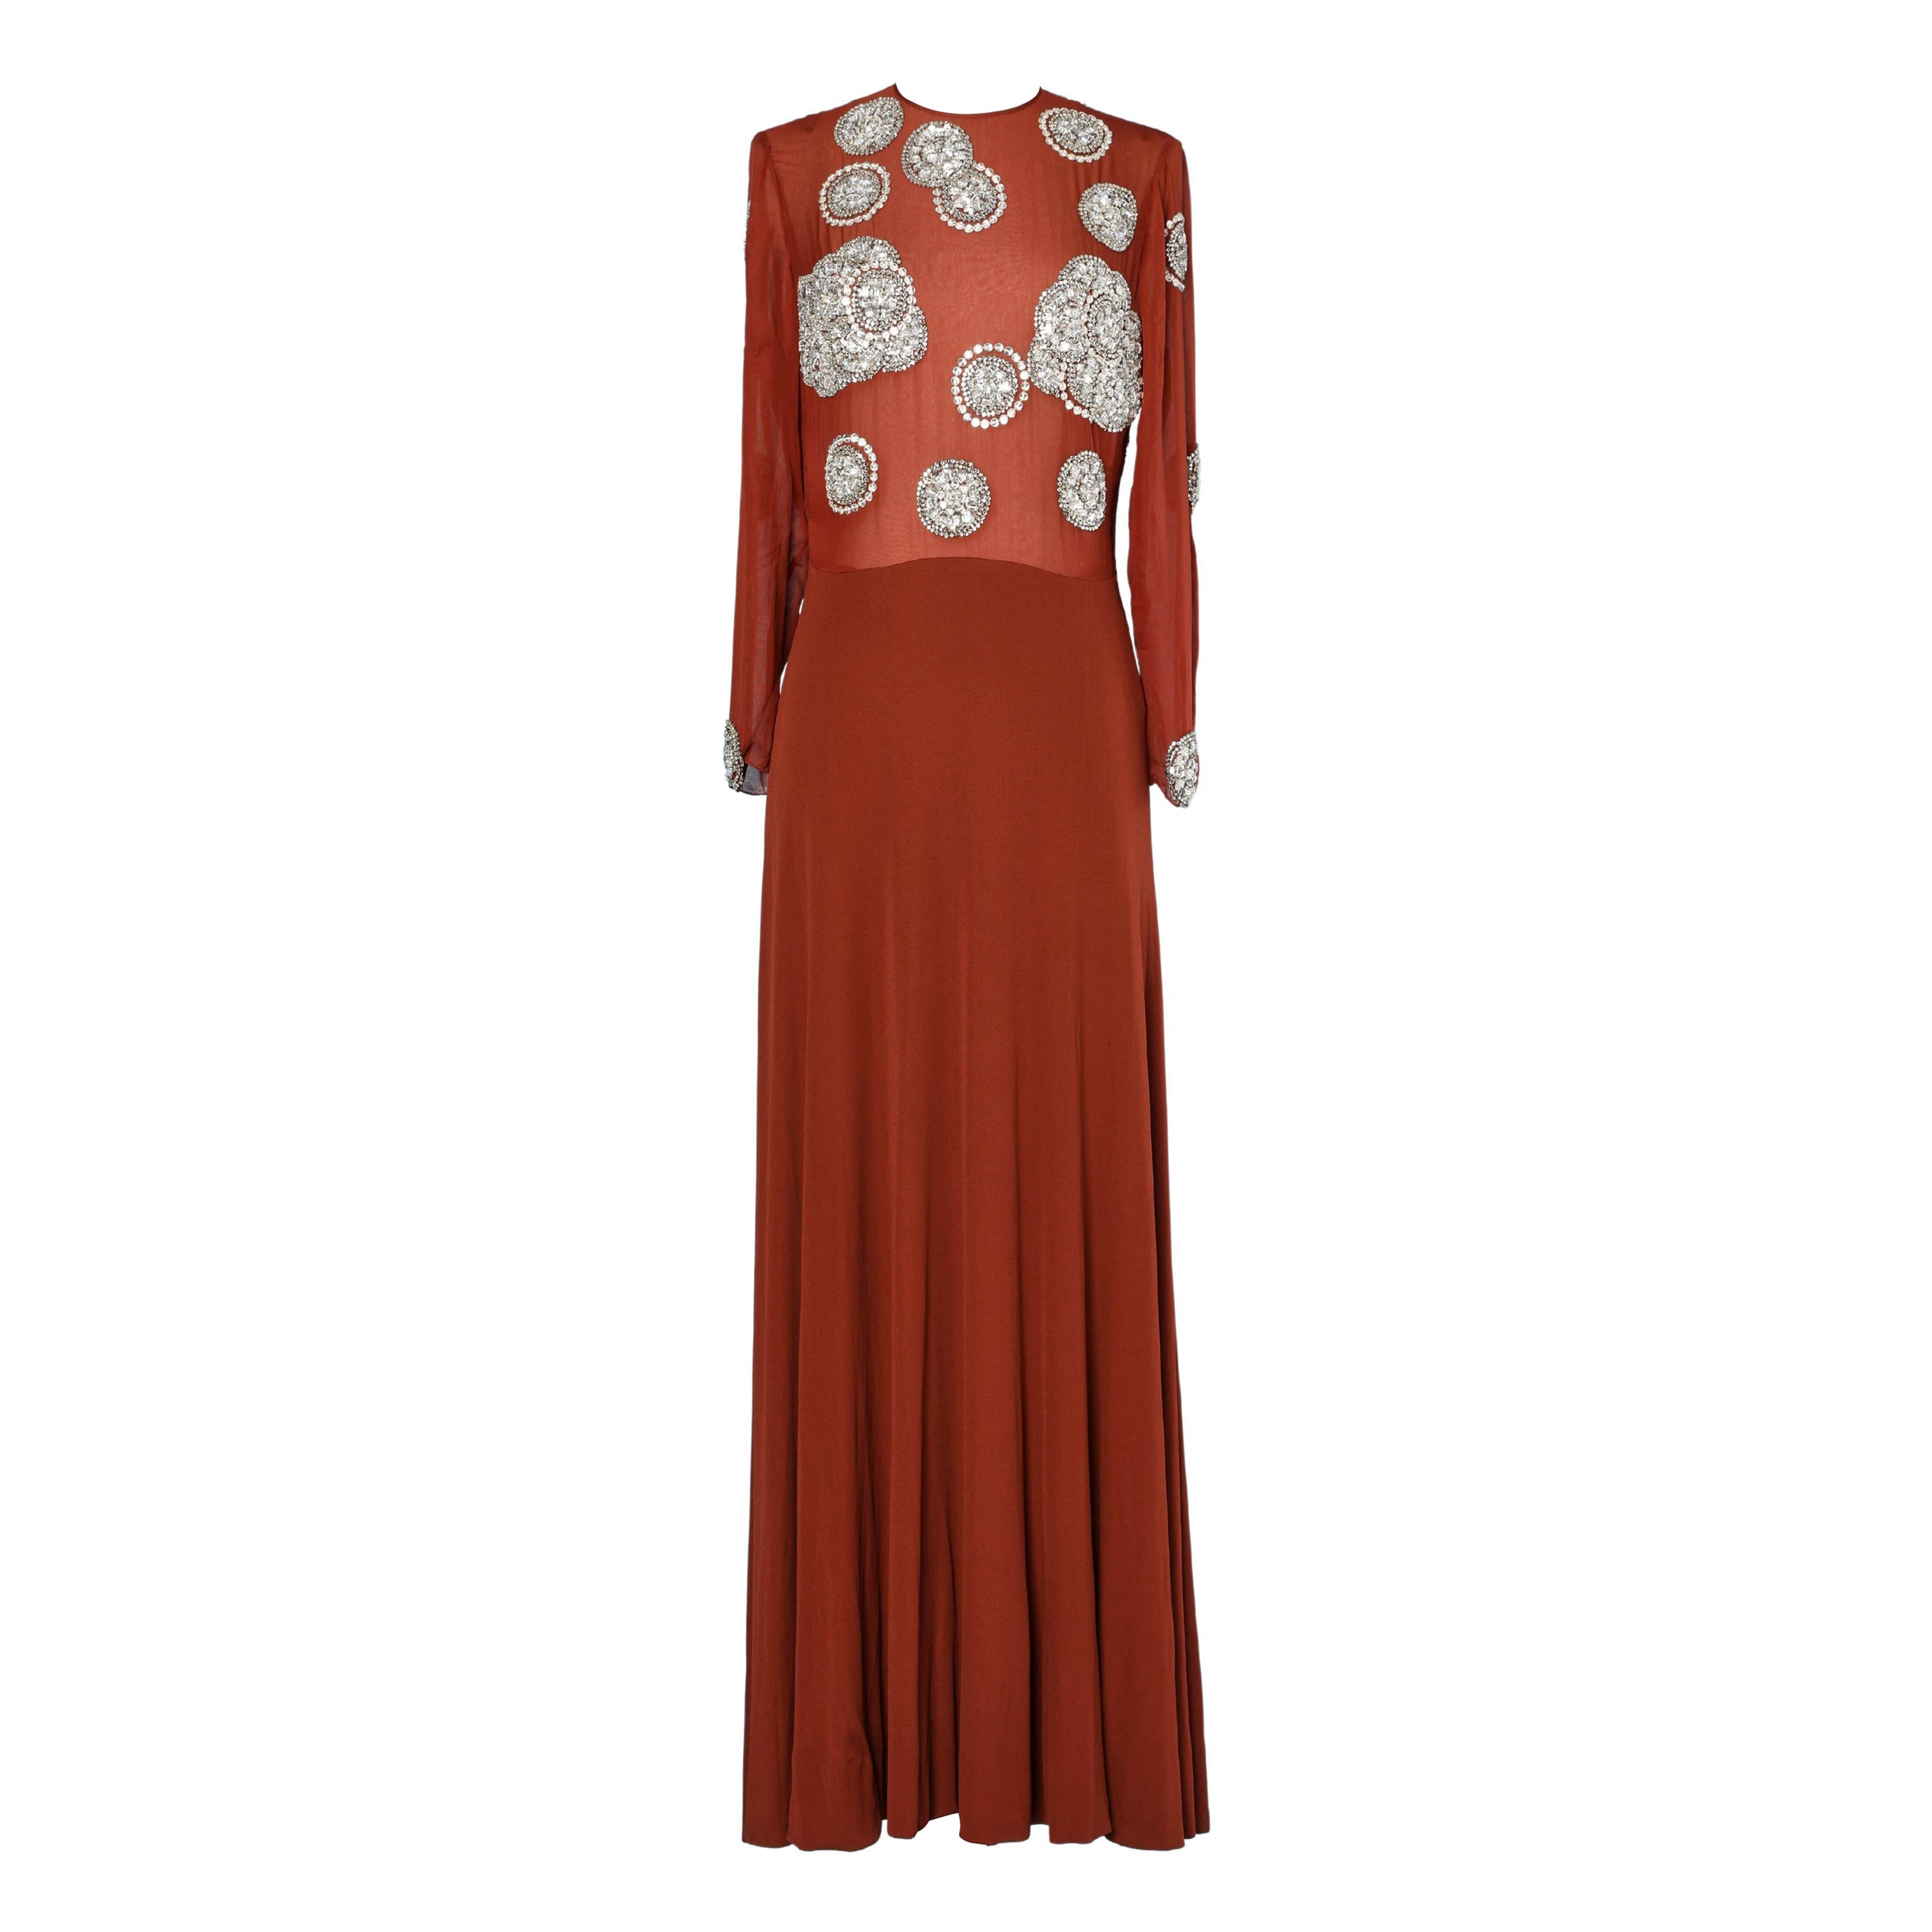 Evening dress in brown chiffon and jersey with rhinestone embroidered Galanos